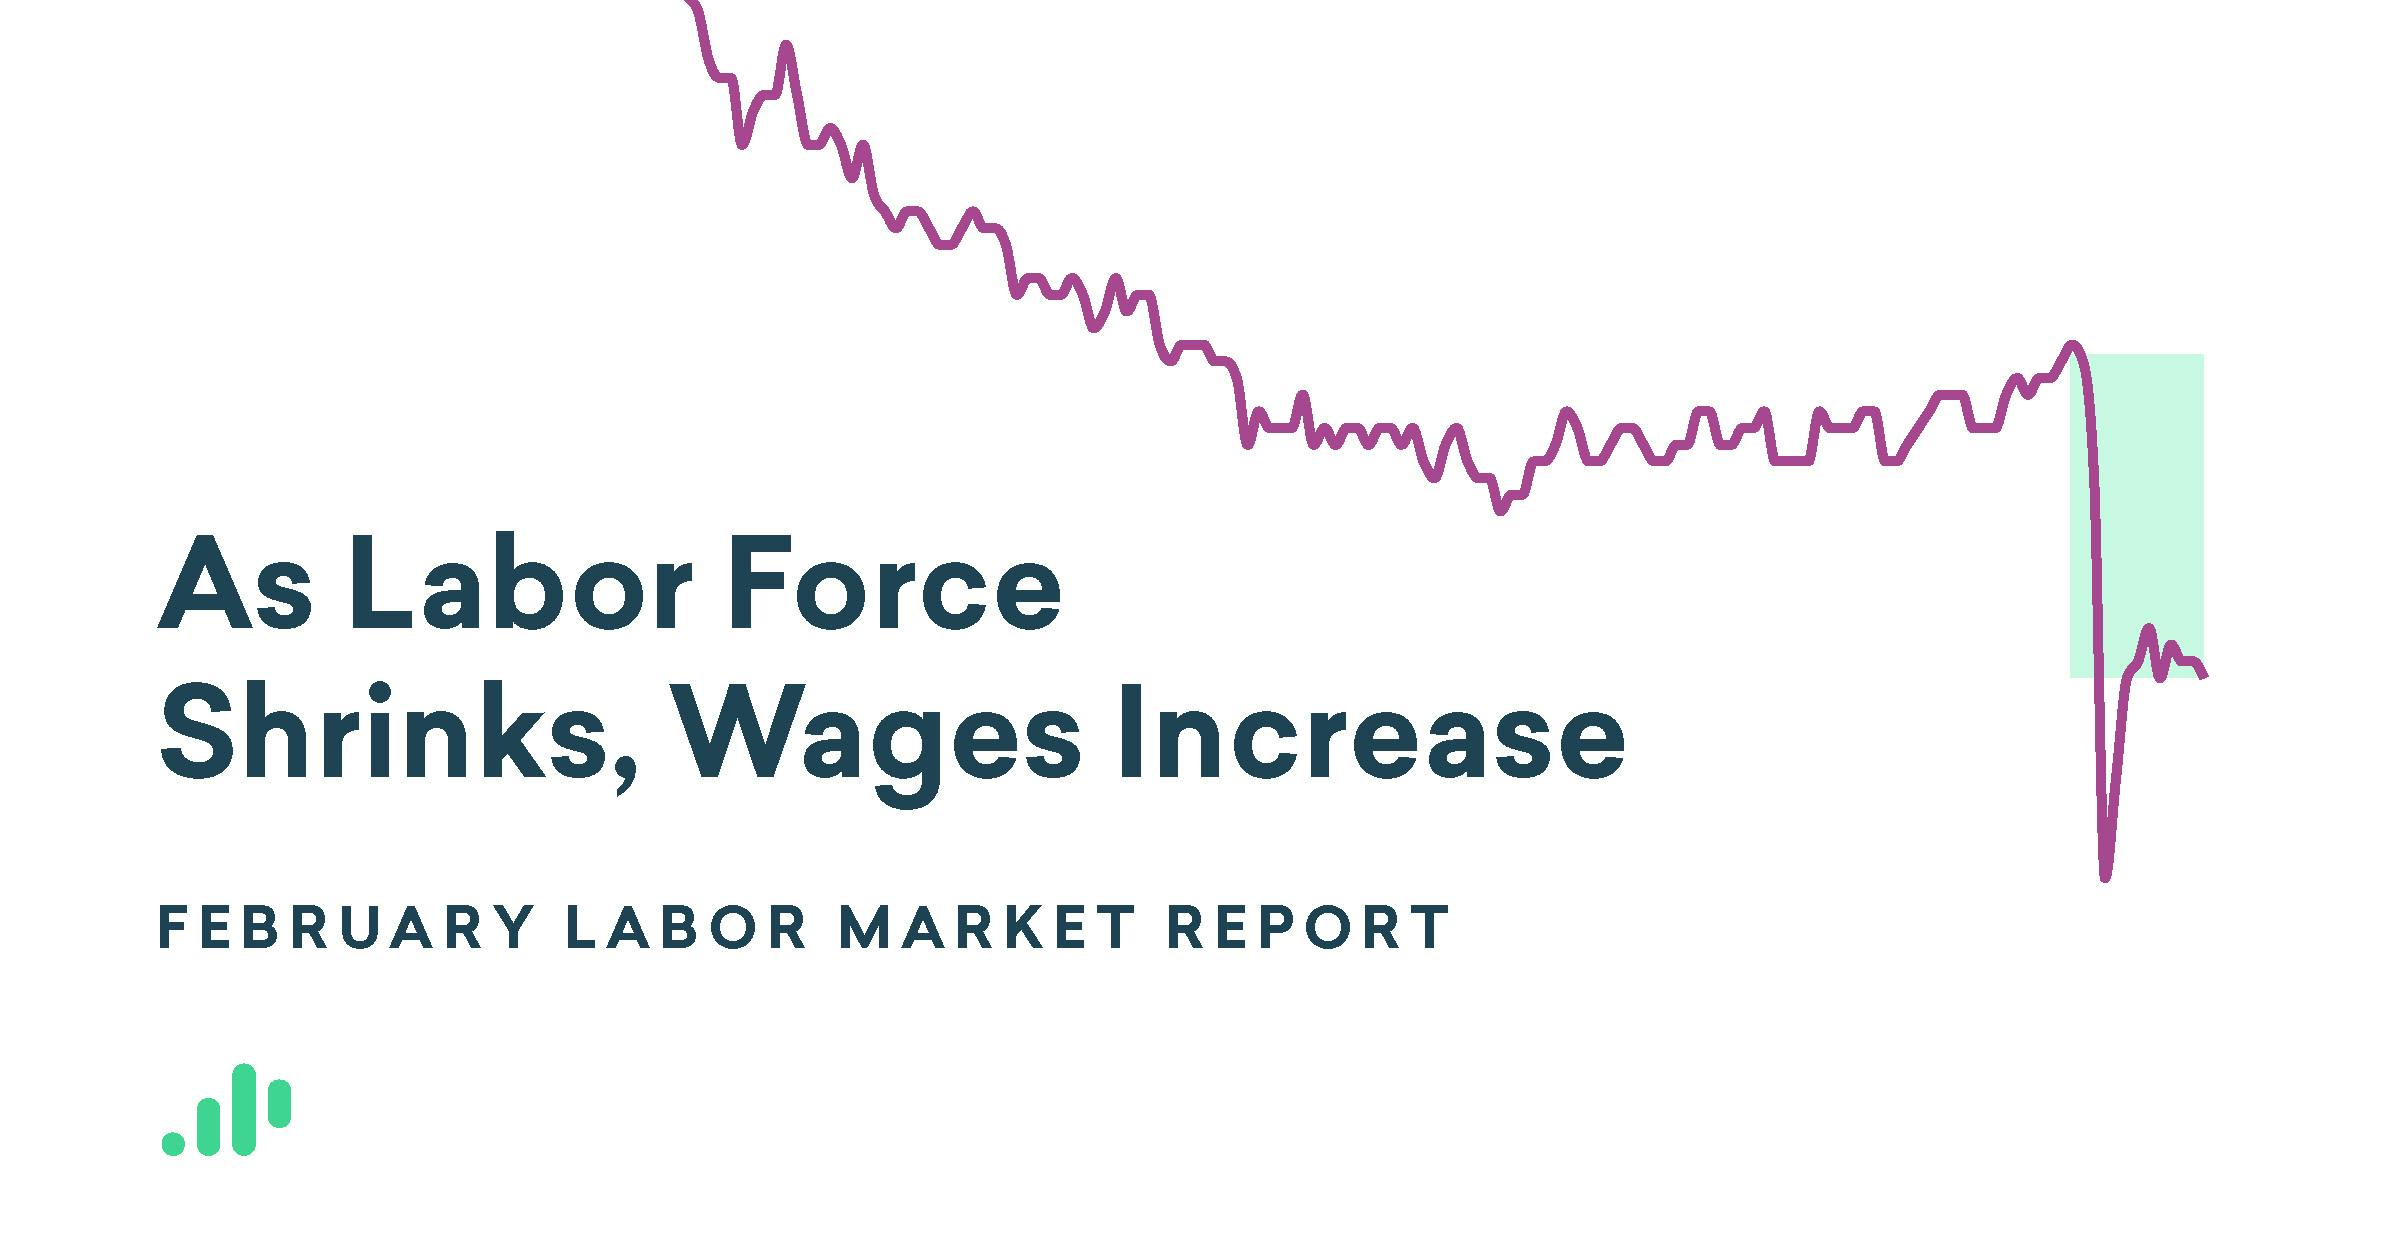 As Labor Force Shrinks, Wages Increase